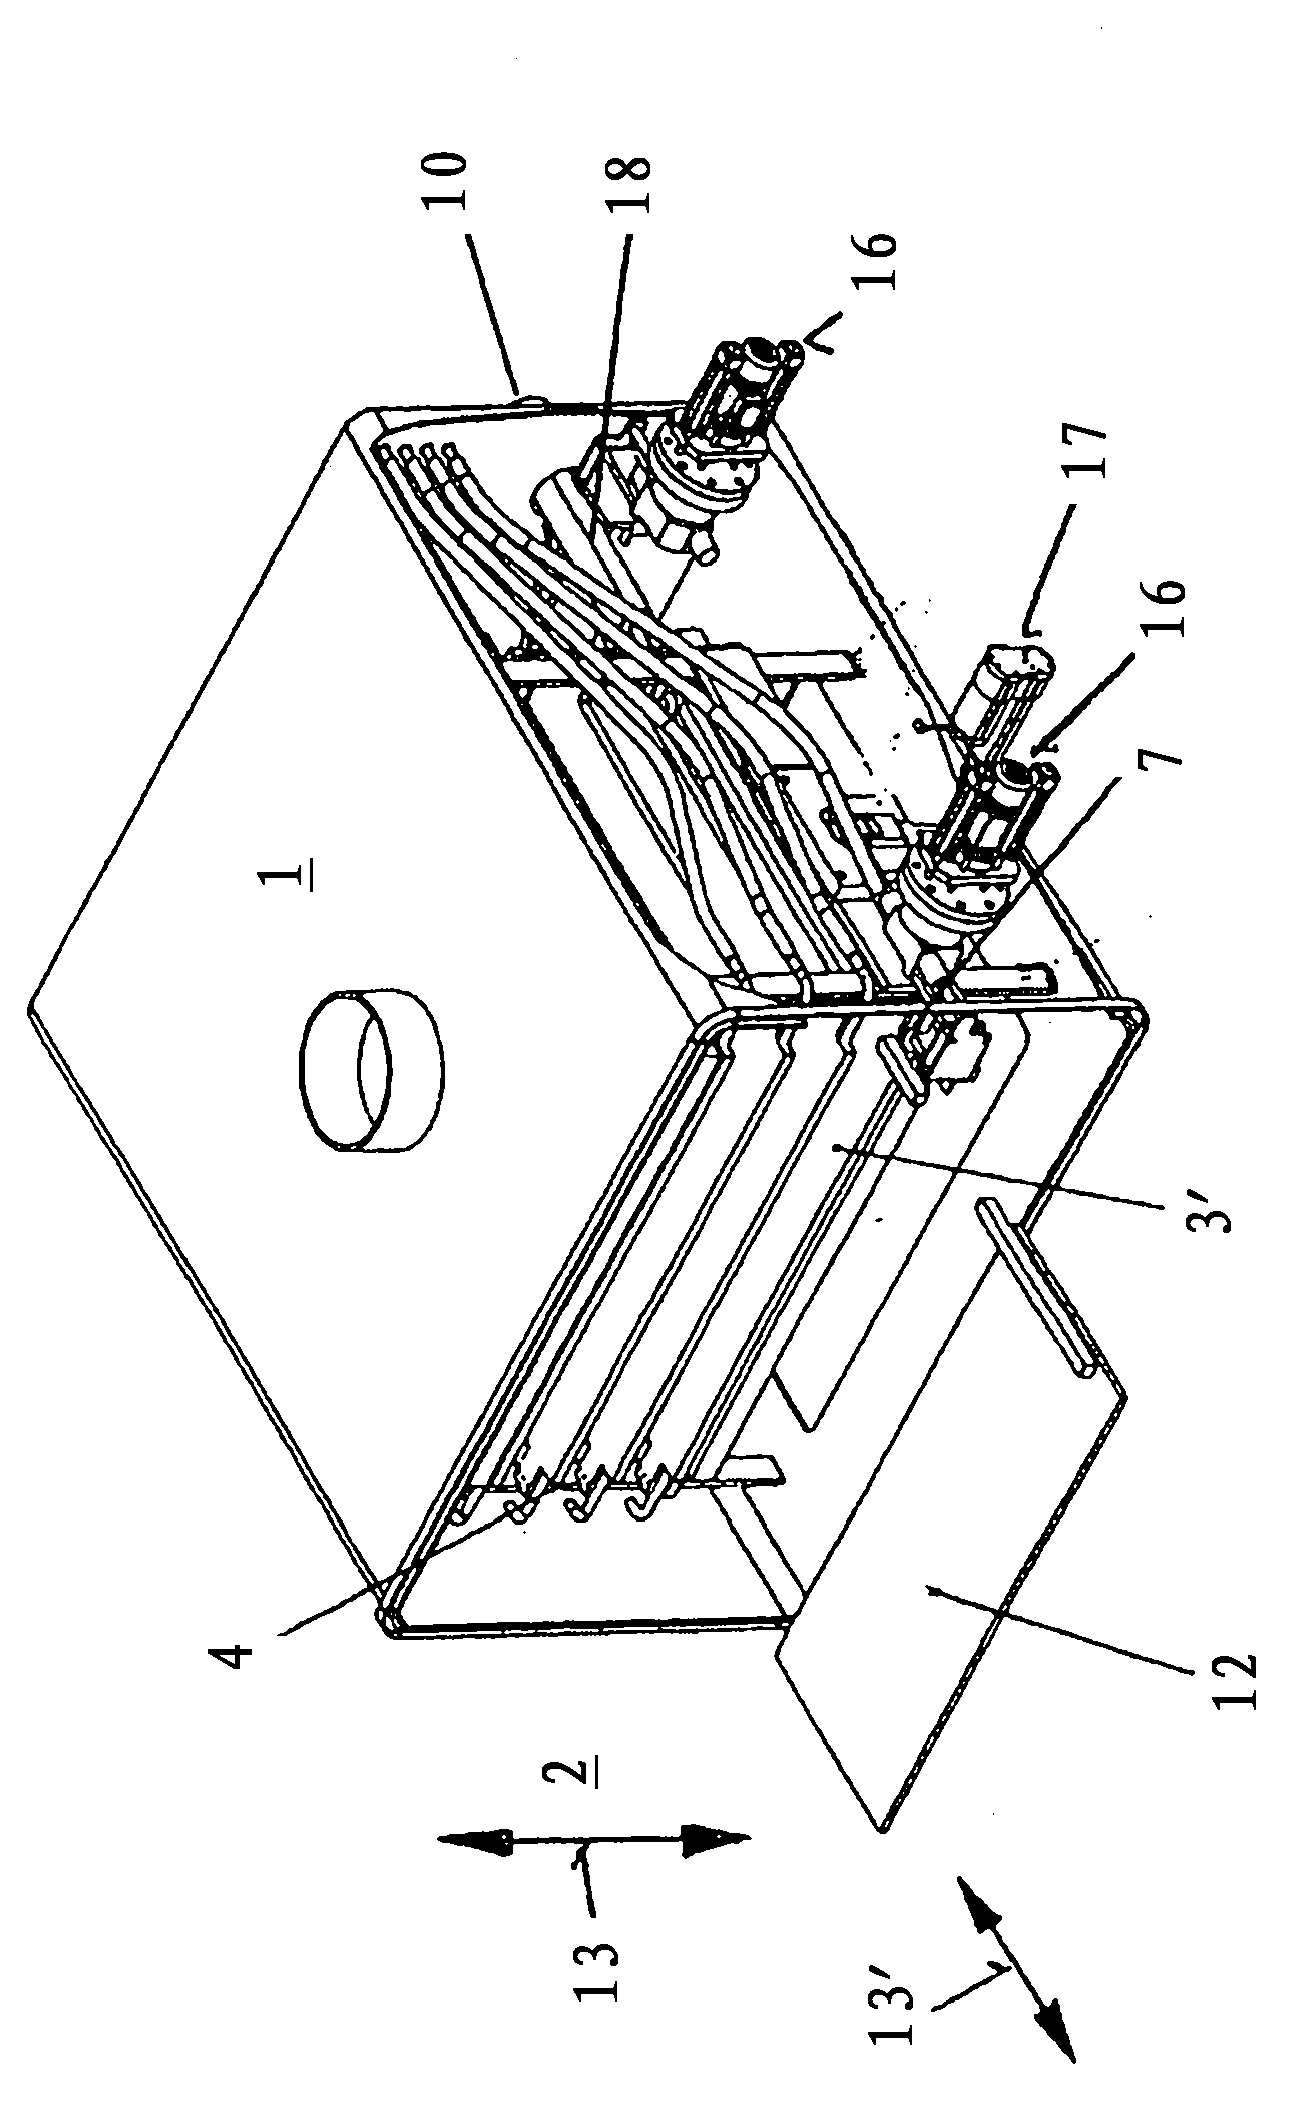 Loading and unloading device for a freeze-drying installation